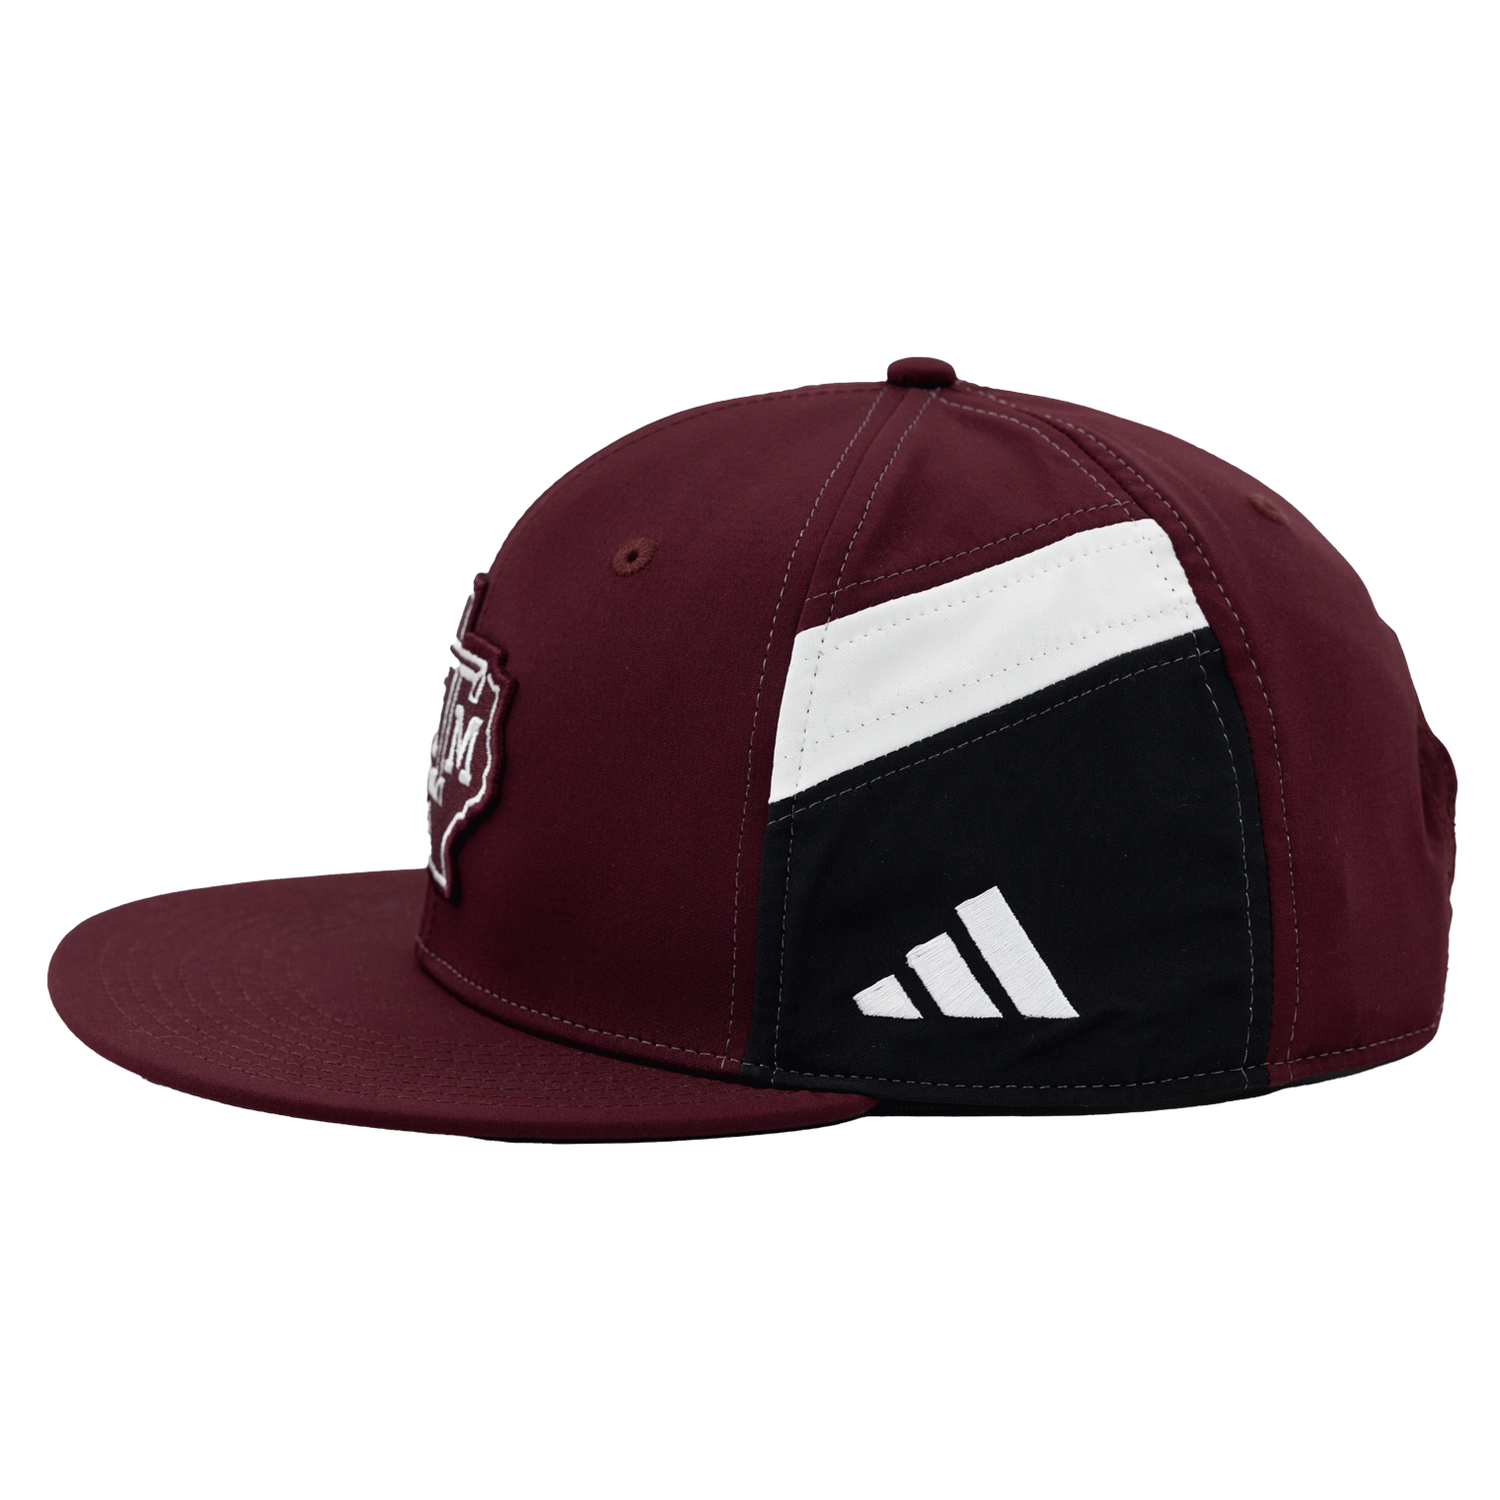 Texas A&M Adidas Lonestar Players Pack Hat